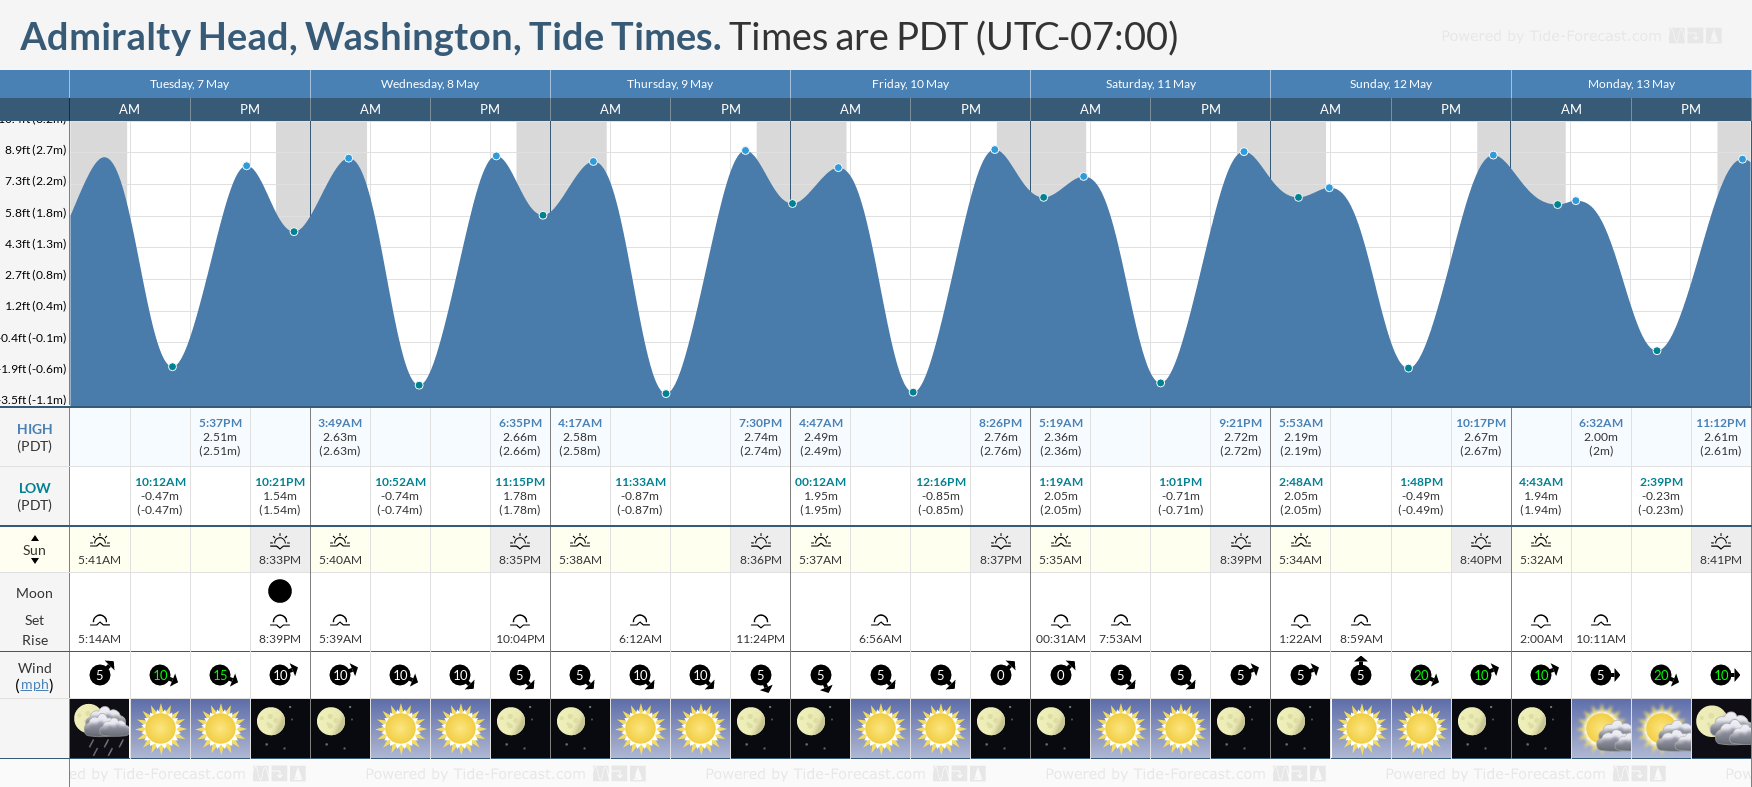 Admiralty Head, Washington Tide Chart including high and low tide tide times for the next 7 days